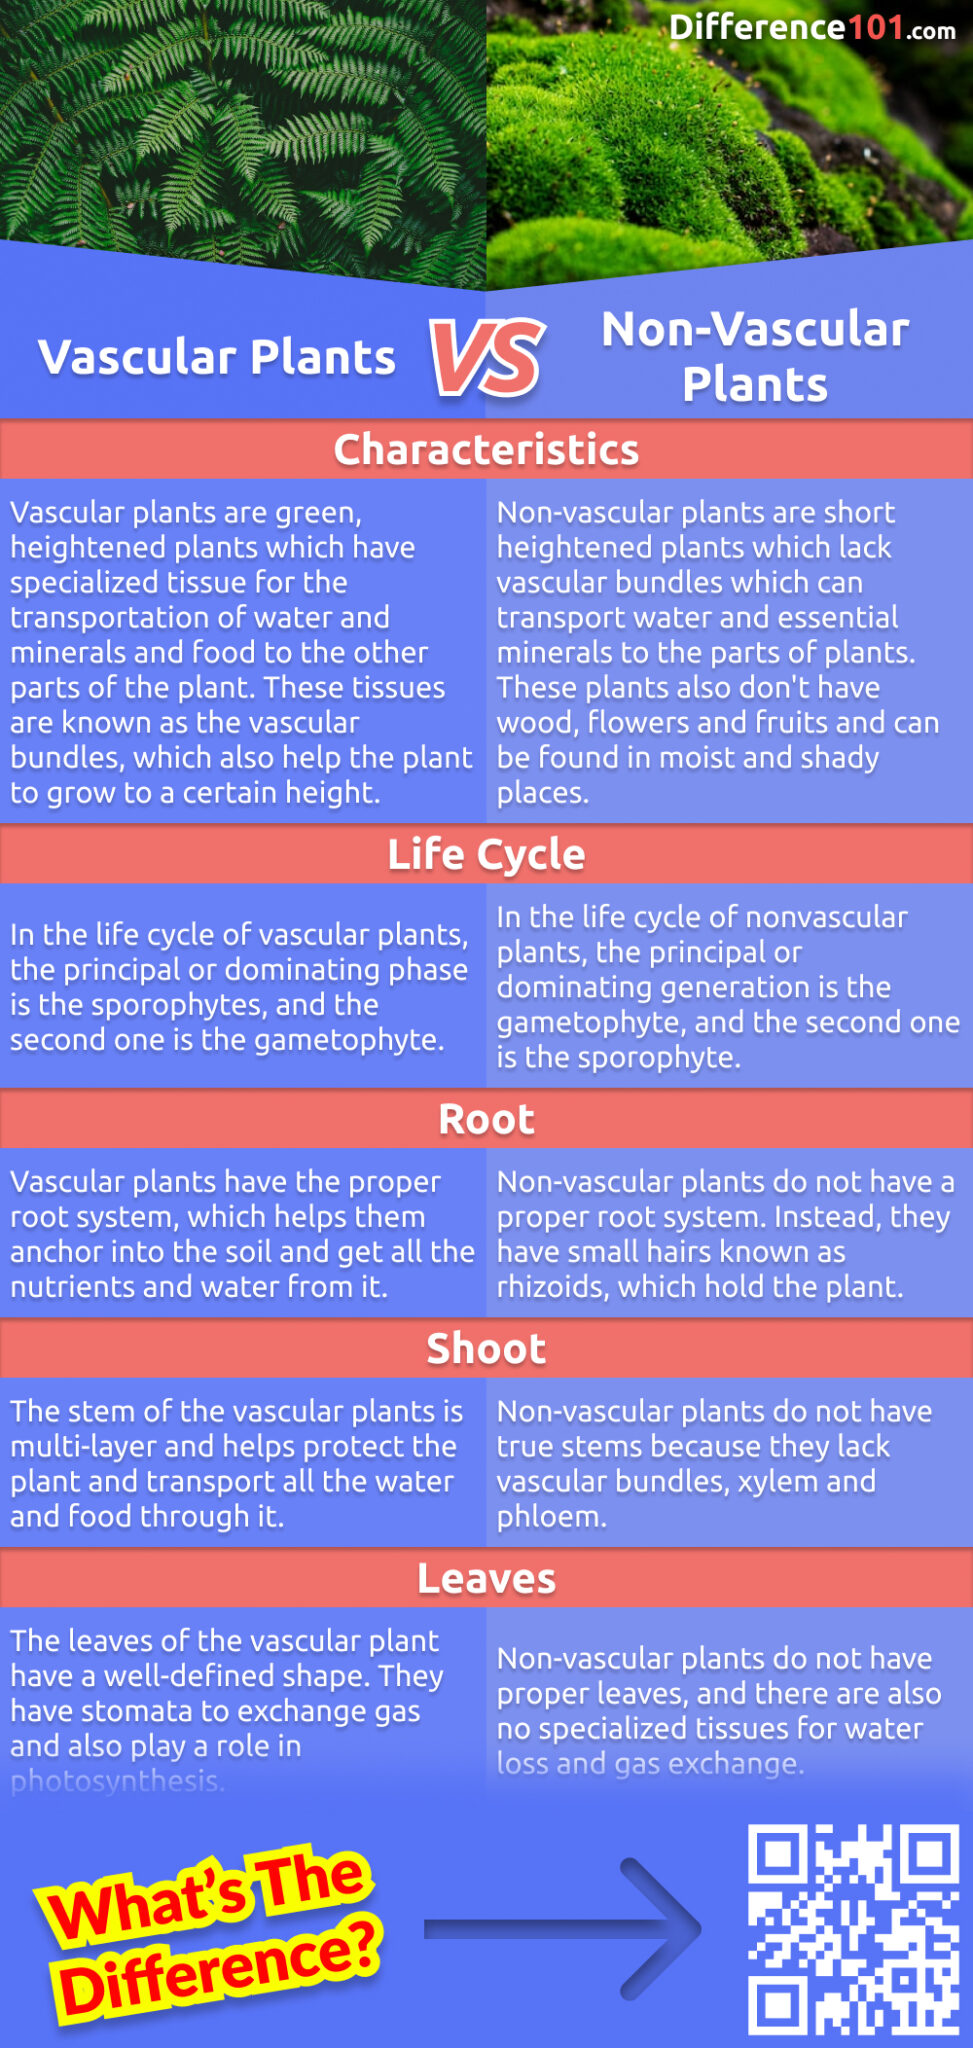 What's the difference between vascular and non-vascular plants? Both types of plants are important in the ecosystem but play different roles. Read more to learn about the difference between these two types of plants.